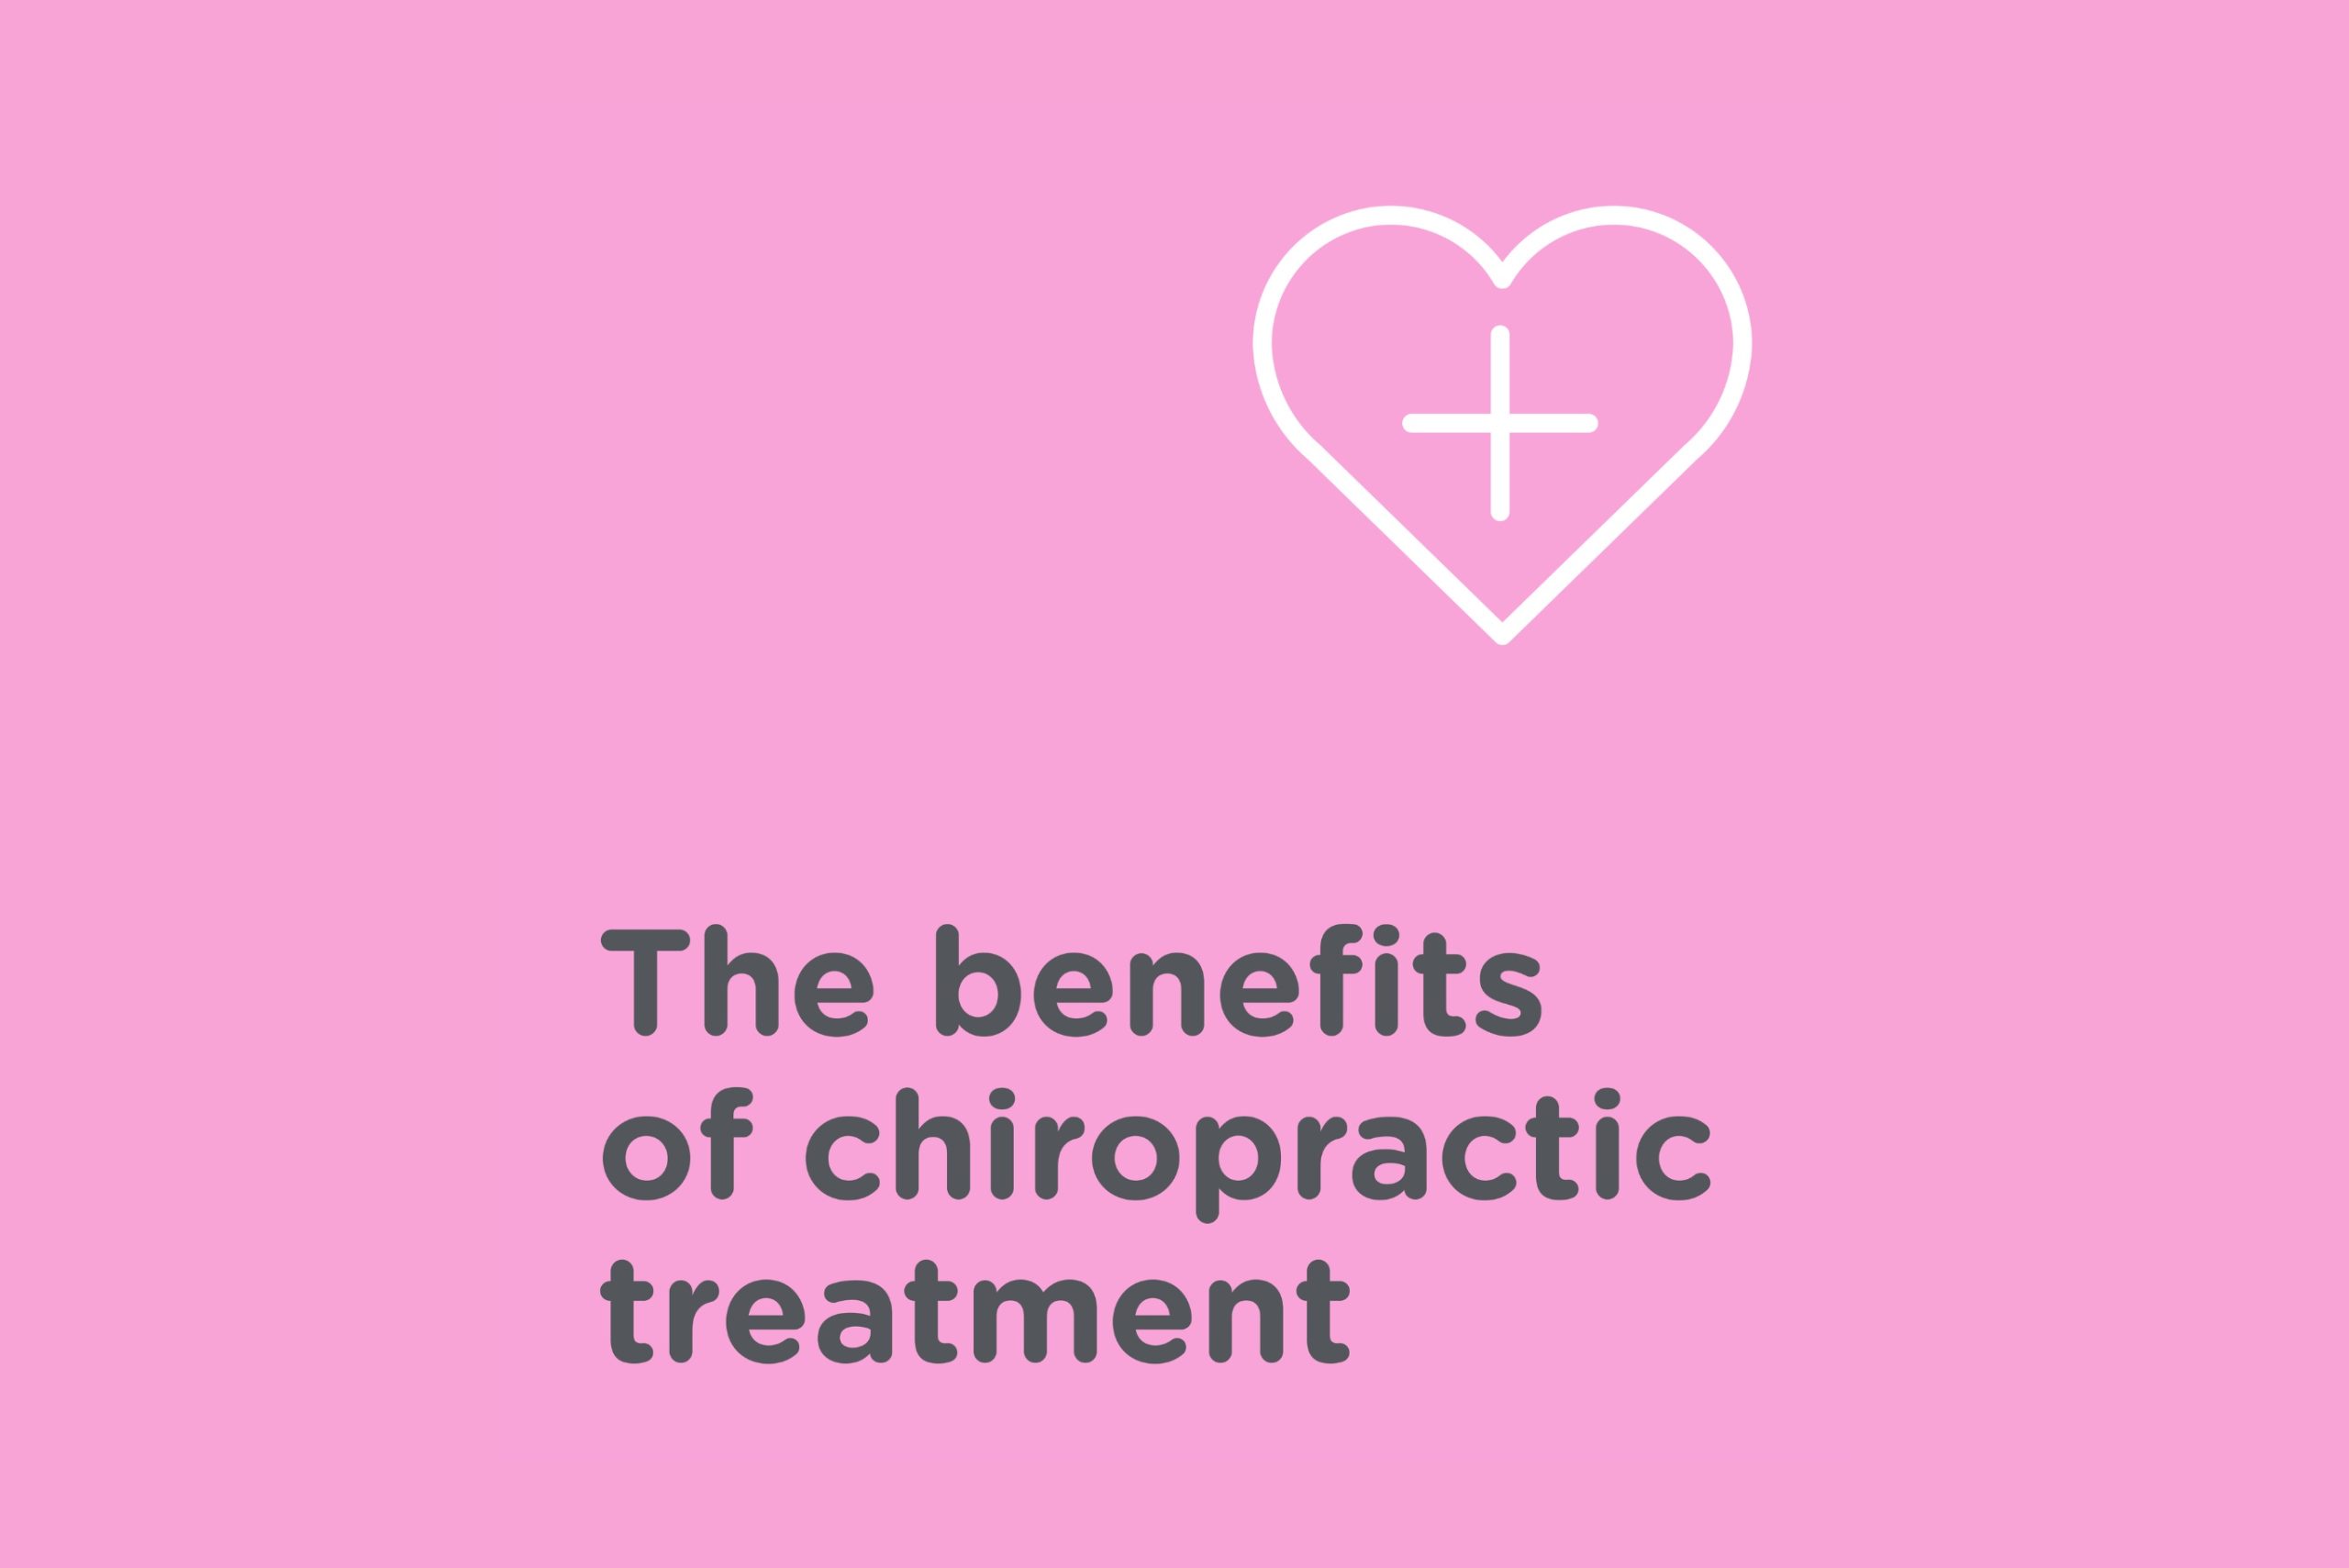 heart icon with plus sign inside and the words the benefit of chiropractic treatment